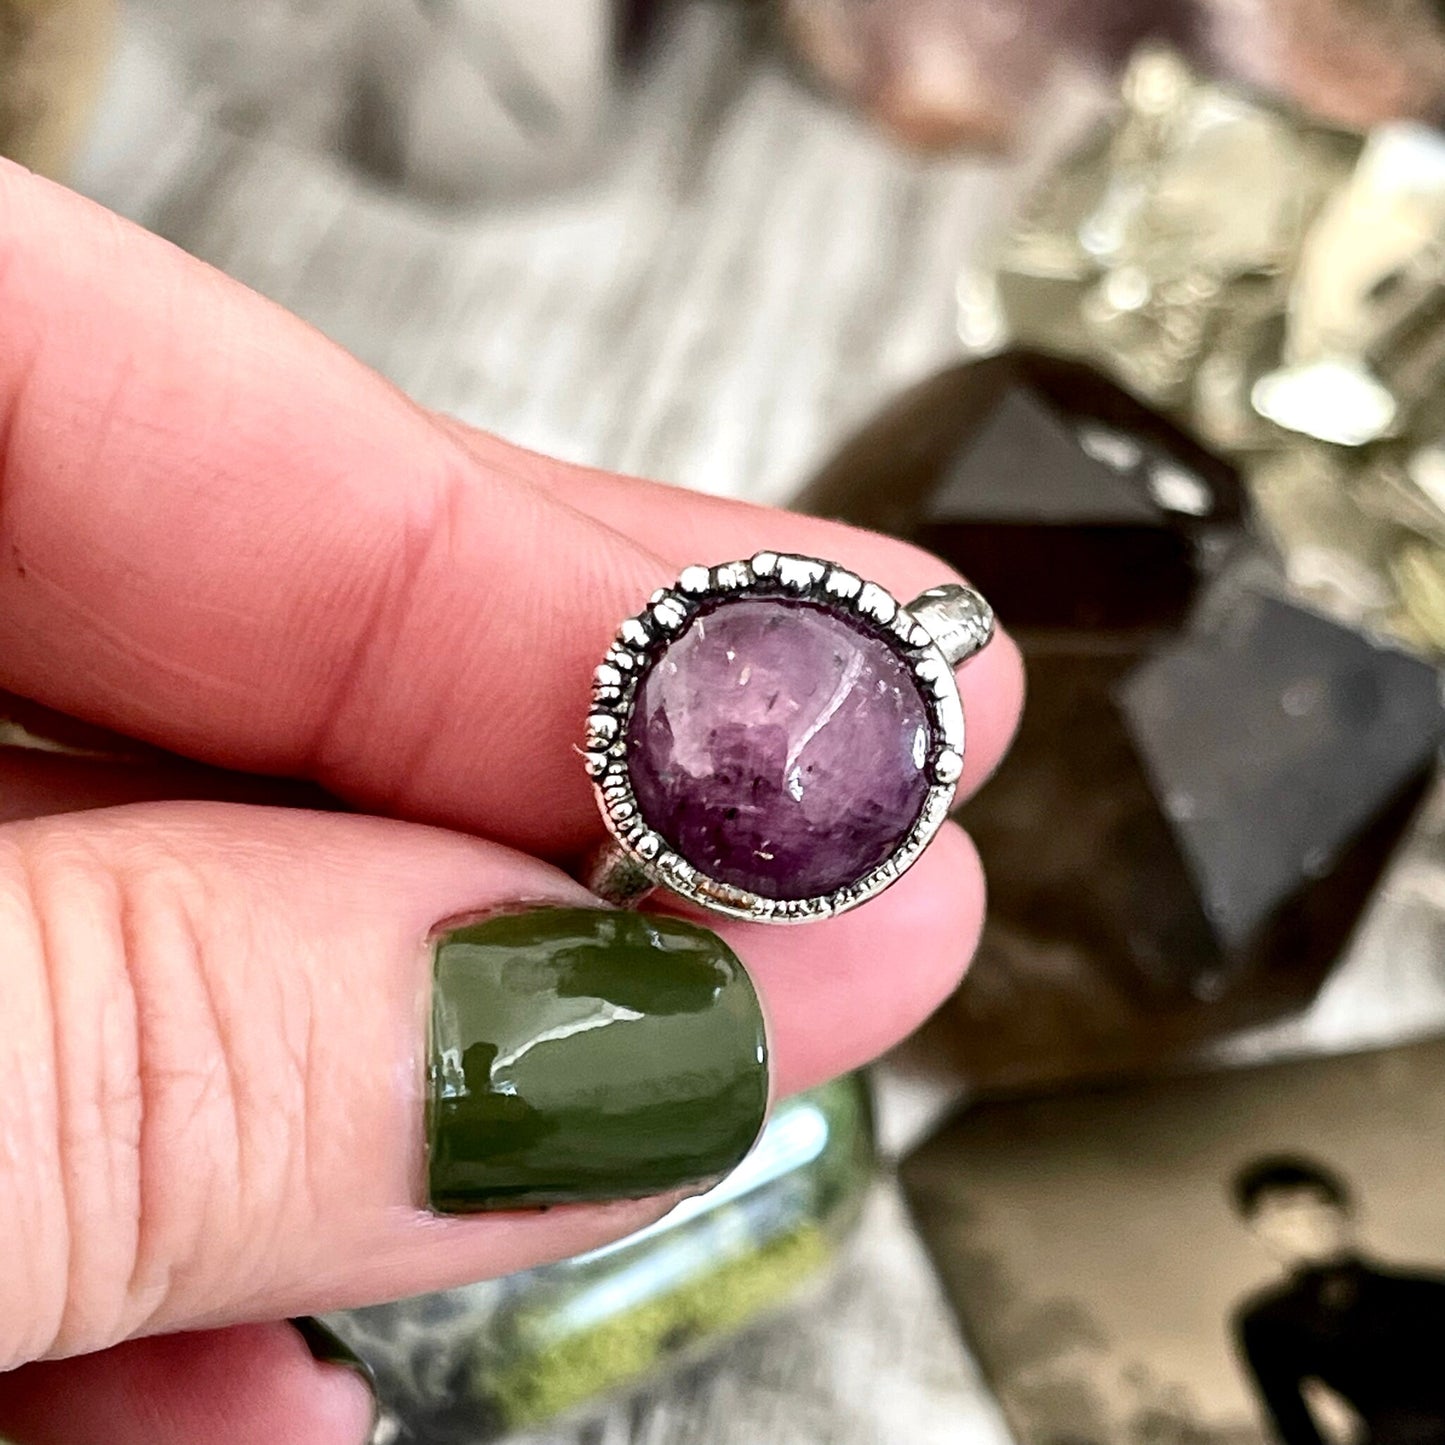 Star Ruby Stone Statement Ring Set in Fine Silver/ Crystal Ring Gift for Woman Star Ruby Jewelry Big Stone Ring - Foxlark Crystal Jewelry